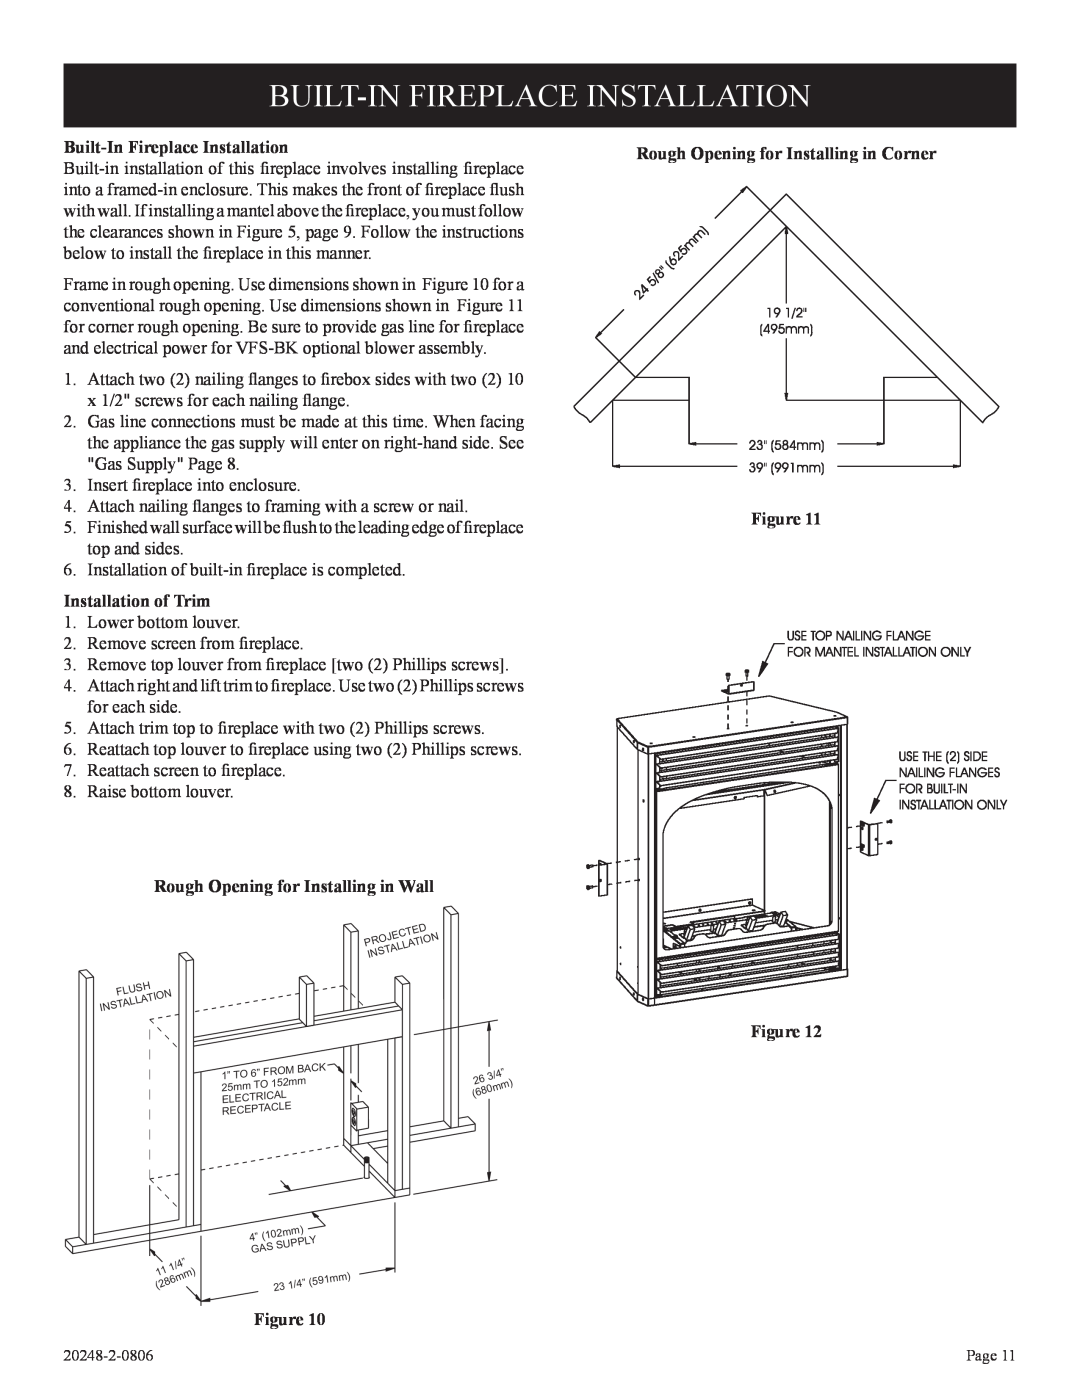 Empire Comfort Systems VF24FP3-1 Built-Infireplace Installation, Built-InFireplace Installation, Installation of Trim 